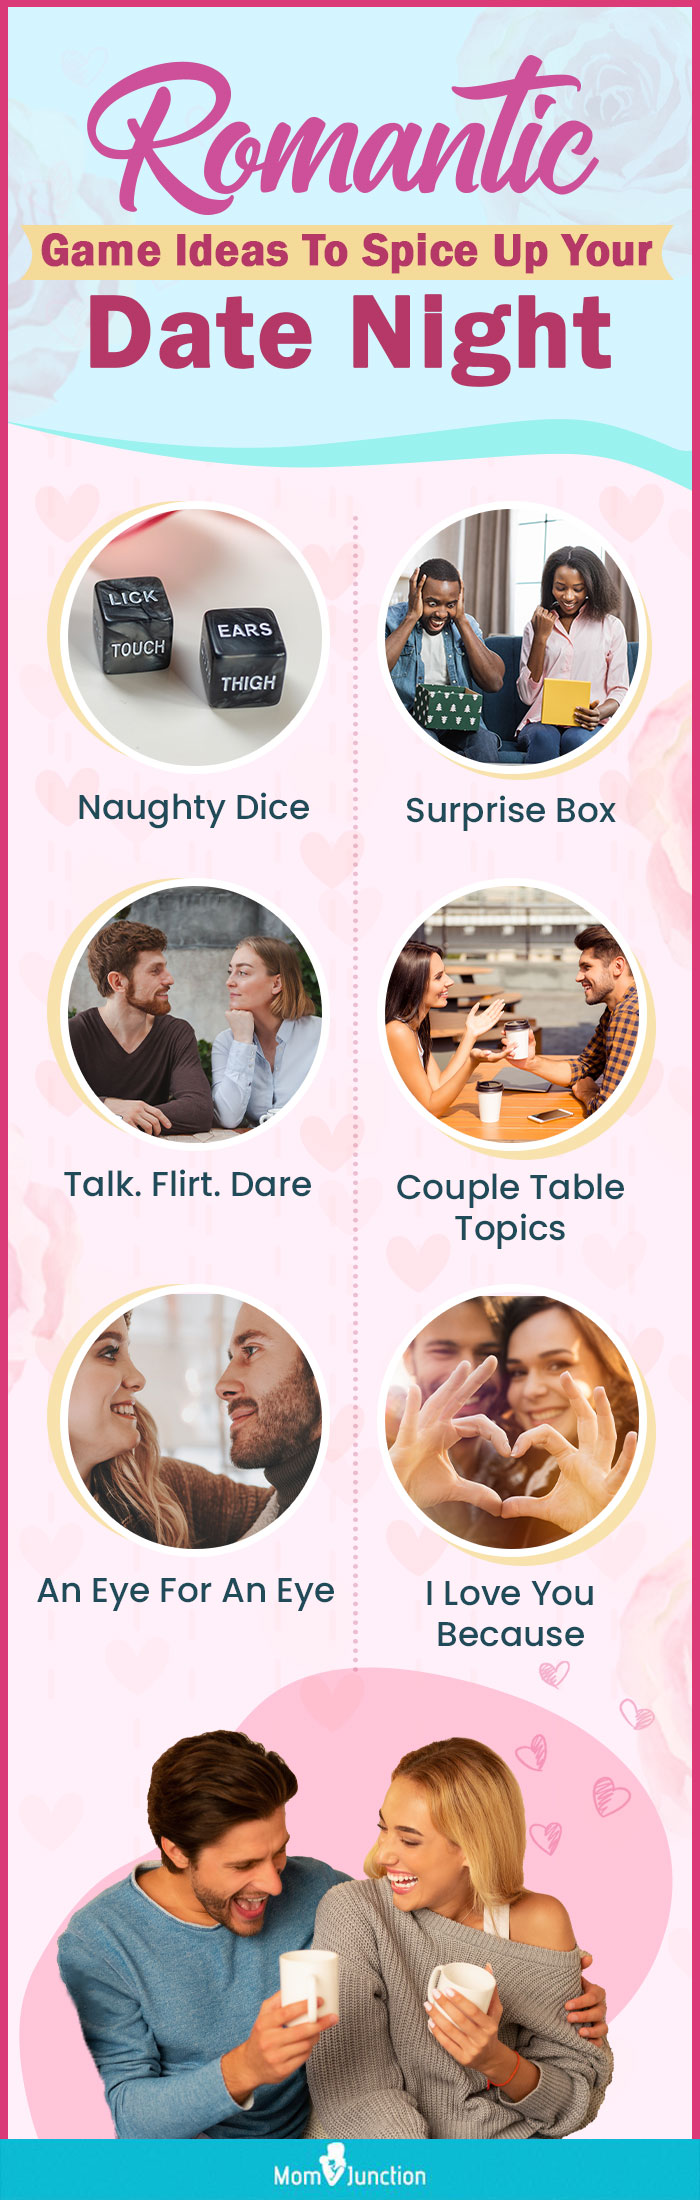 romantic games to pay wth boyfriend girlfriend [infographic]